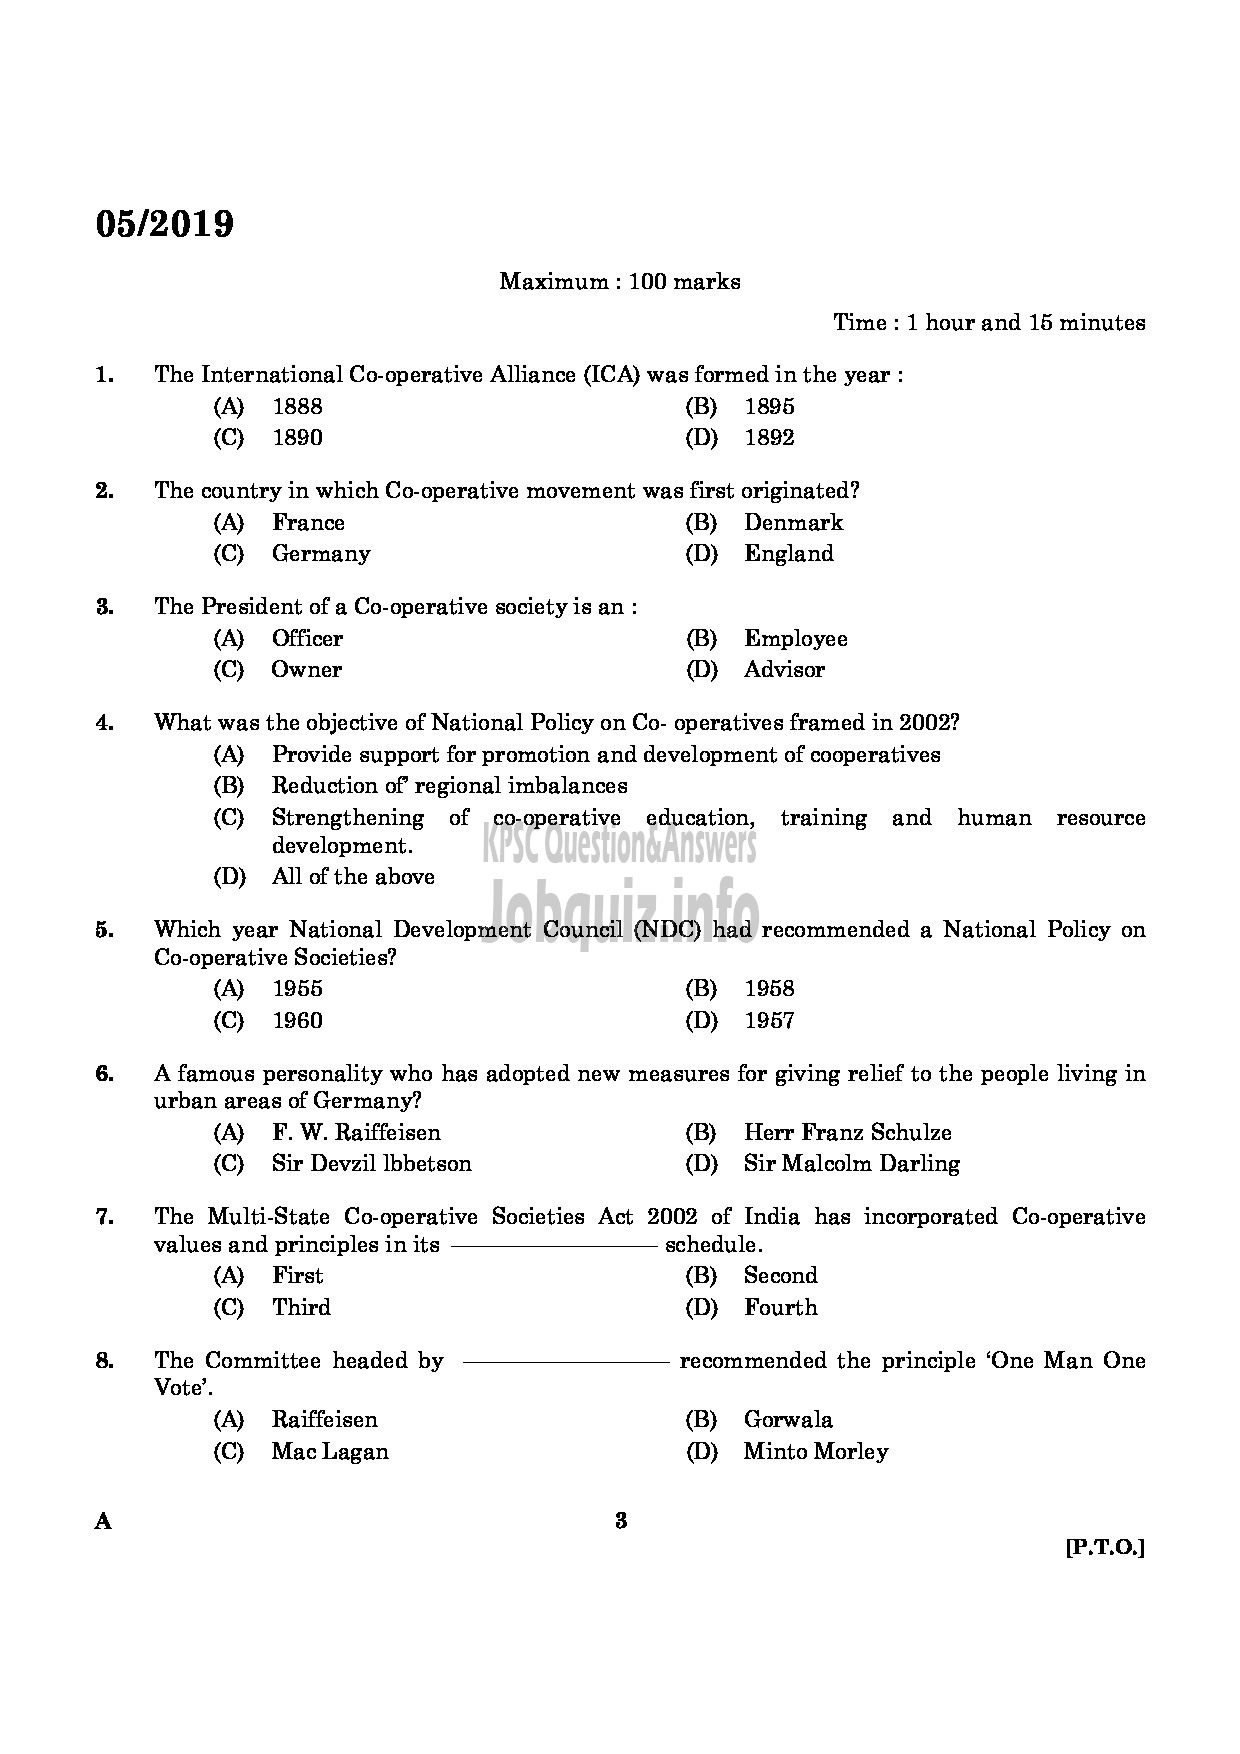 Kerala PSC Question Paper - BRANCH MANAGER DISTRICT COOPERATIVE BANK English-1